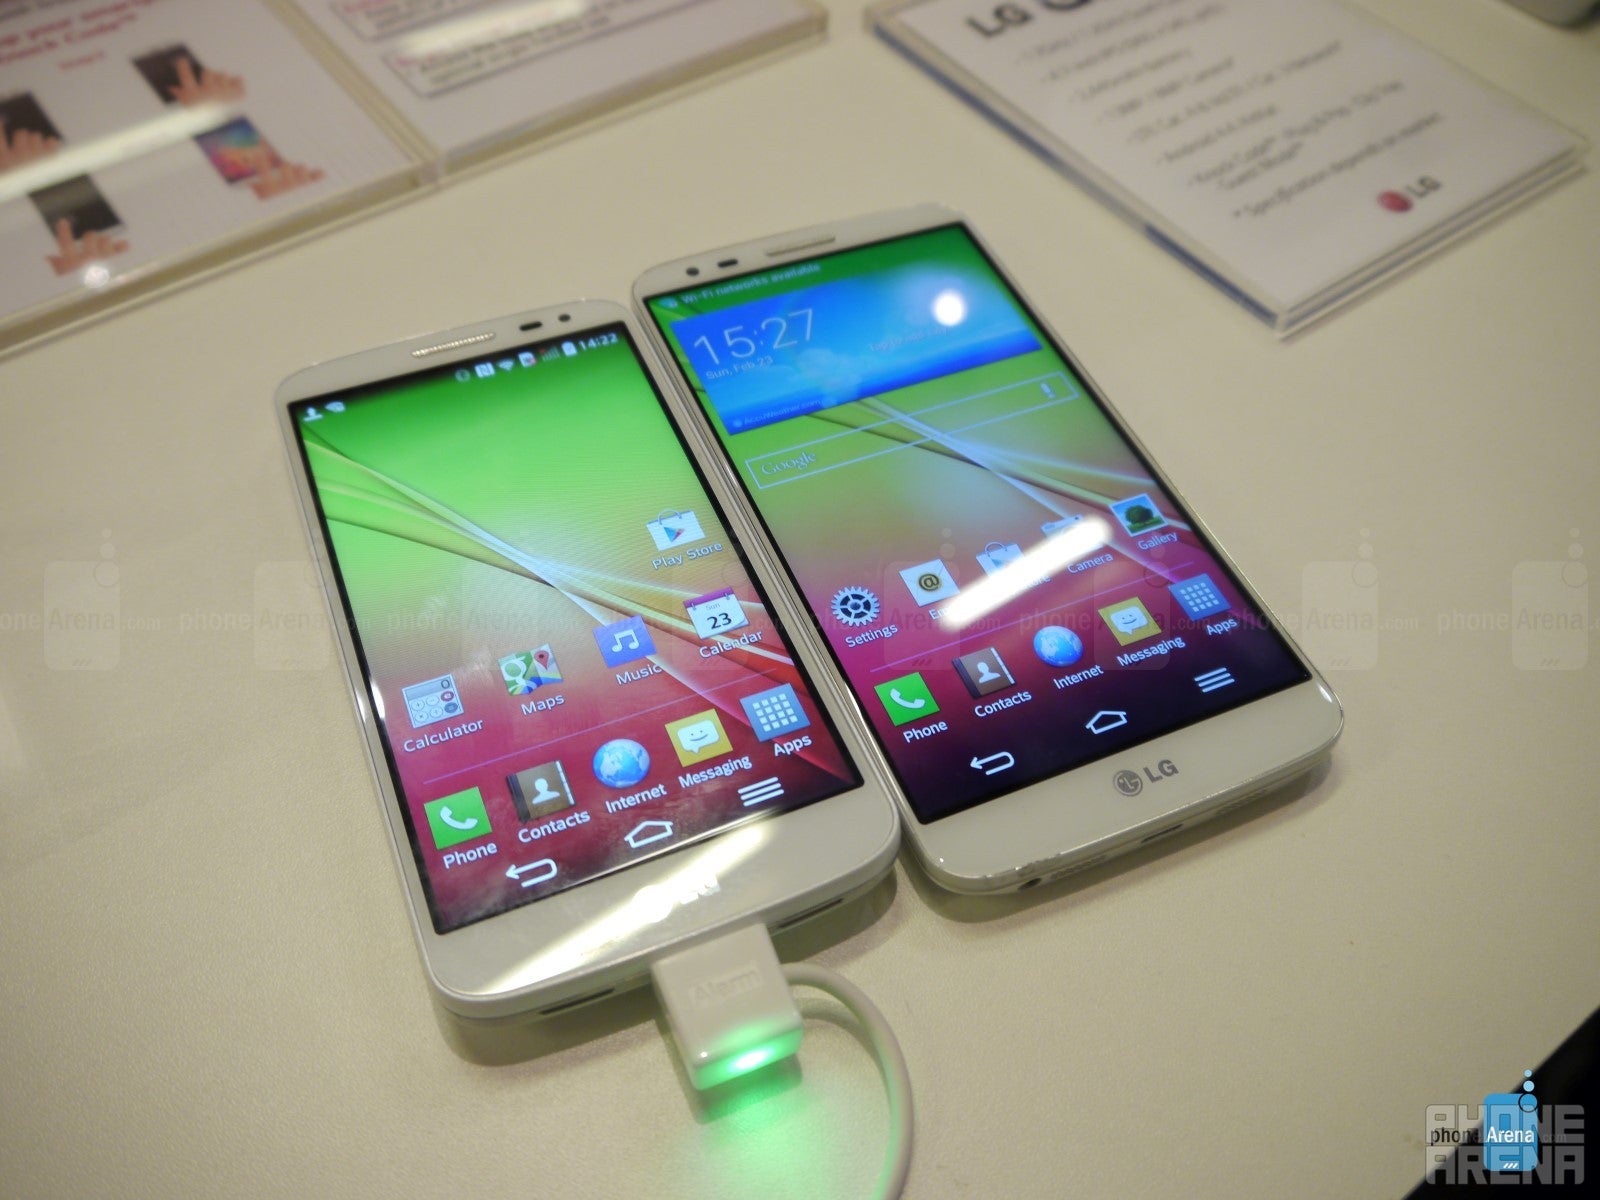 The G2 mini comes with a less powerful chip - LG G2 mini vs LG G2: first look